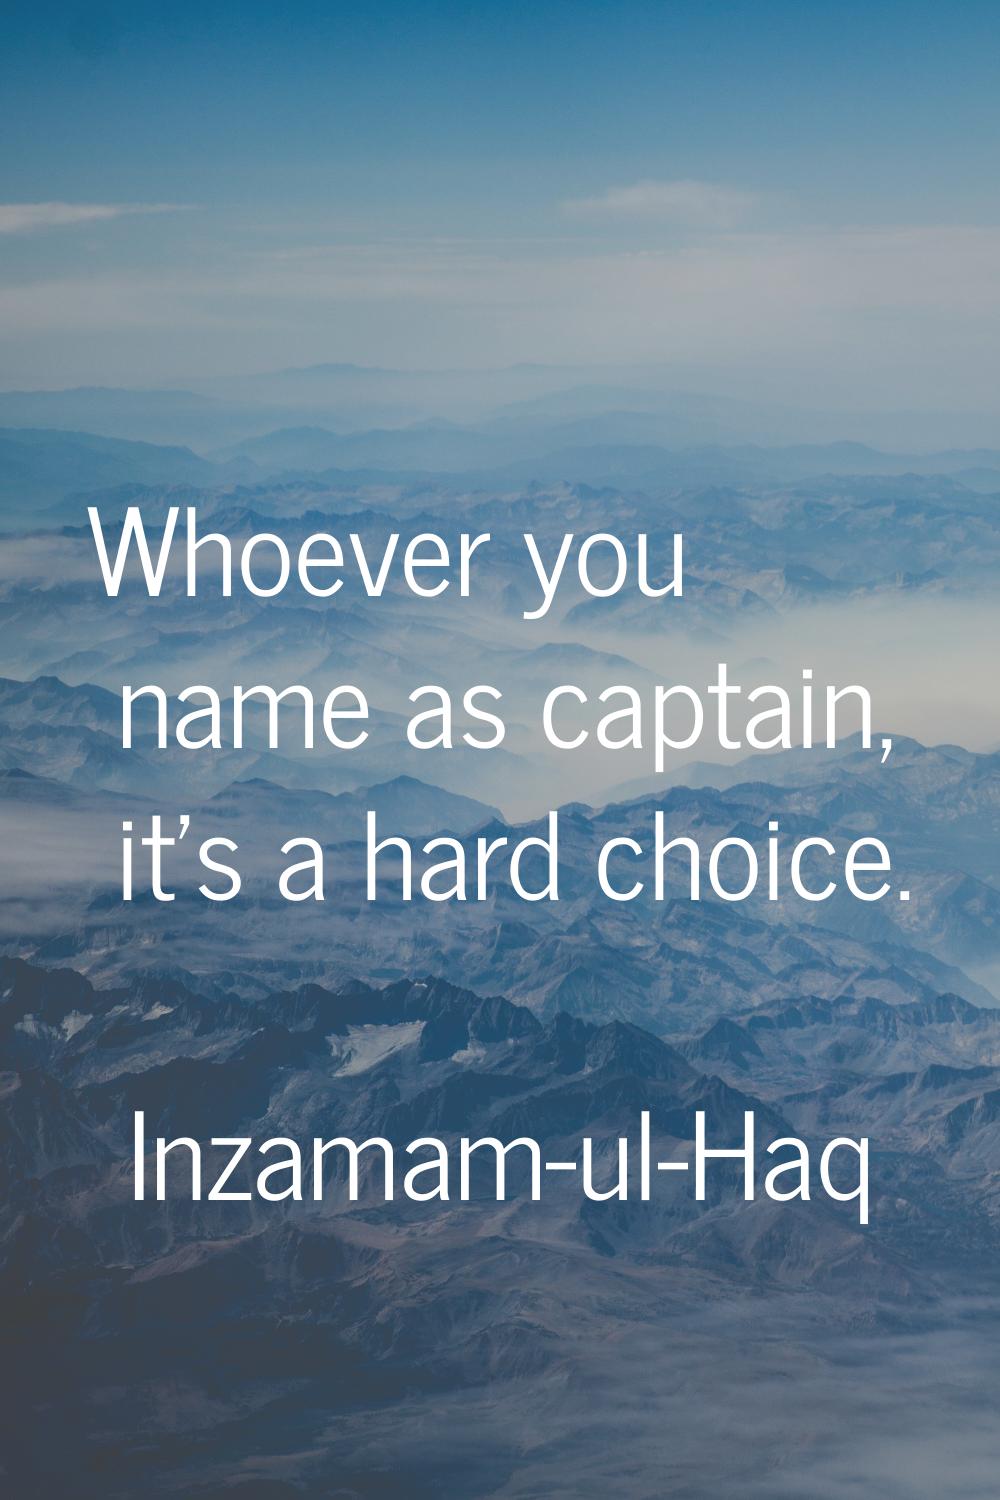 Whoever you name as captain, it's a hard choice.